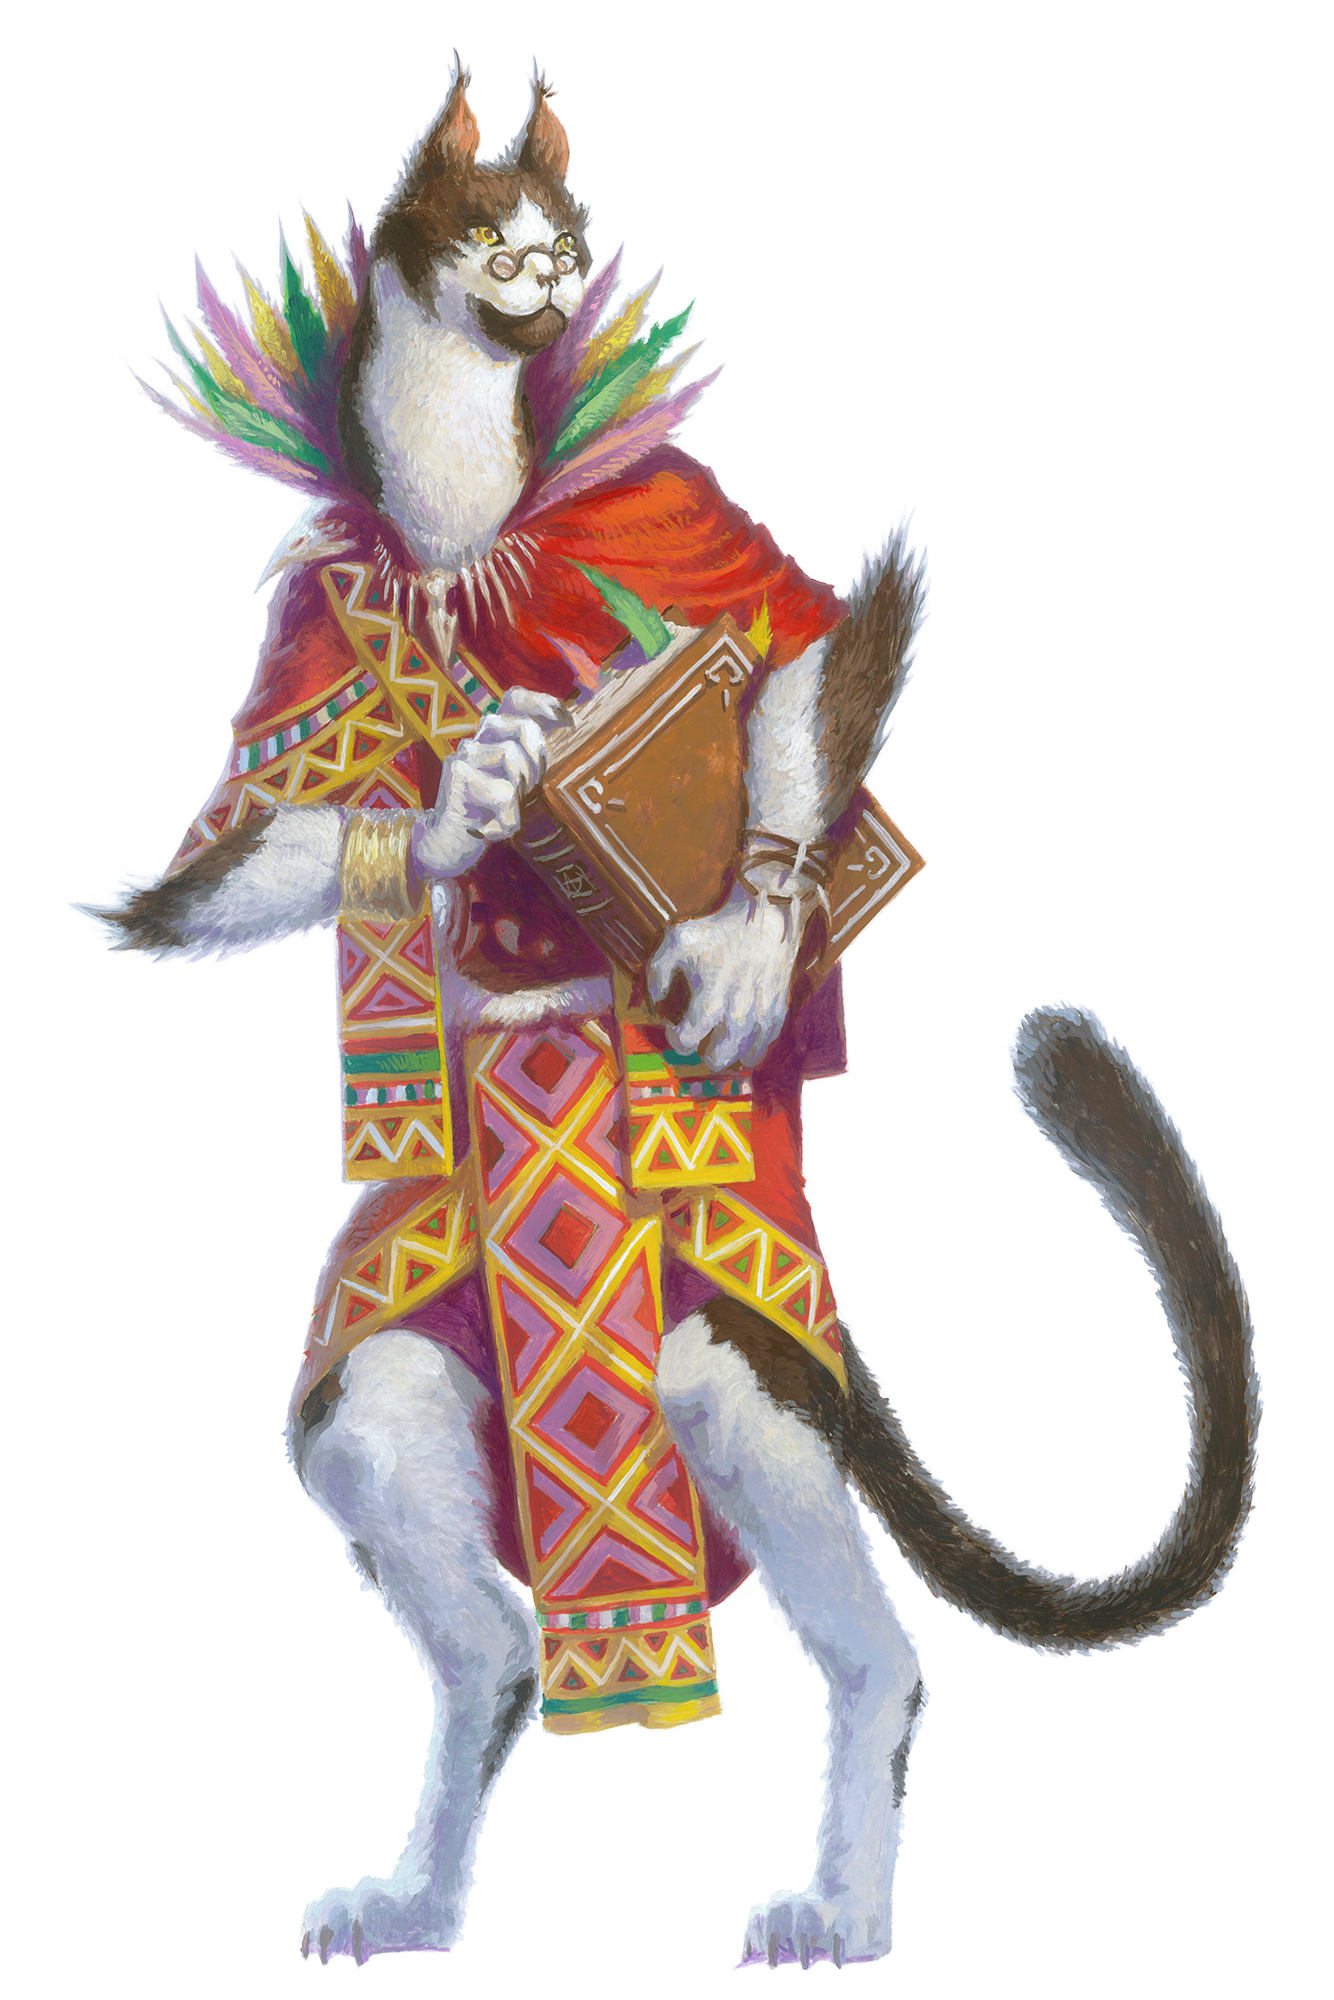 : A bipedal cat dressed in colorful robes holding a large book